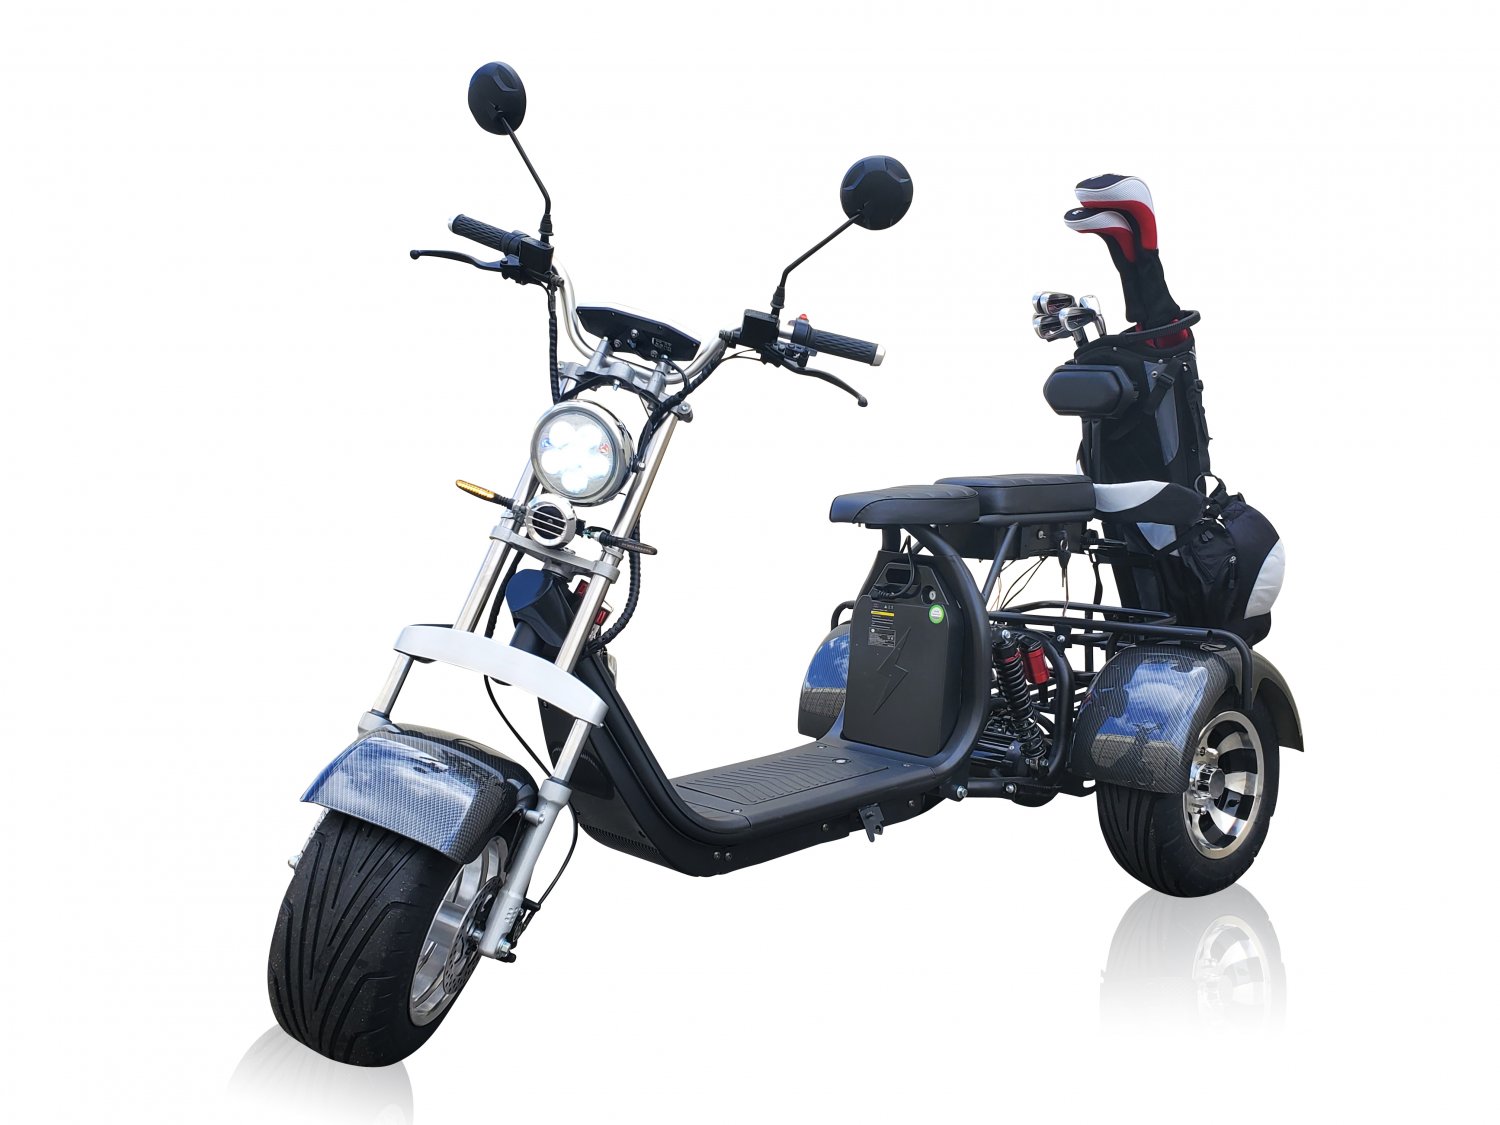 2000W Electric 3 Wheel Scooter Trike Harley Chopper Style Golf Cart Mobility Scooter CARBON FIBER